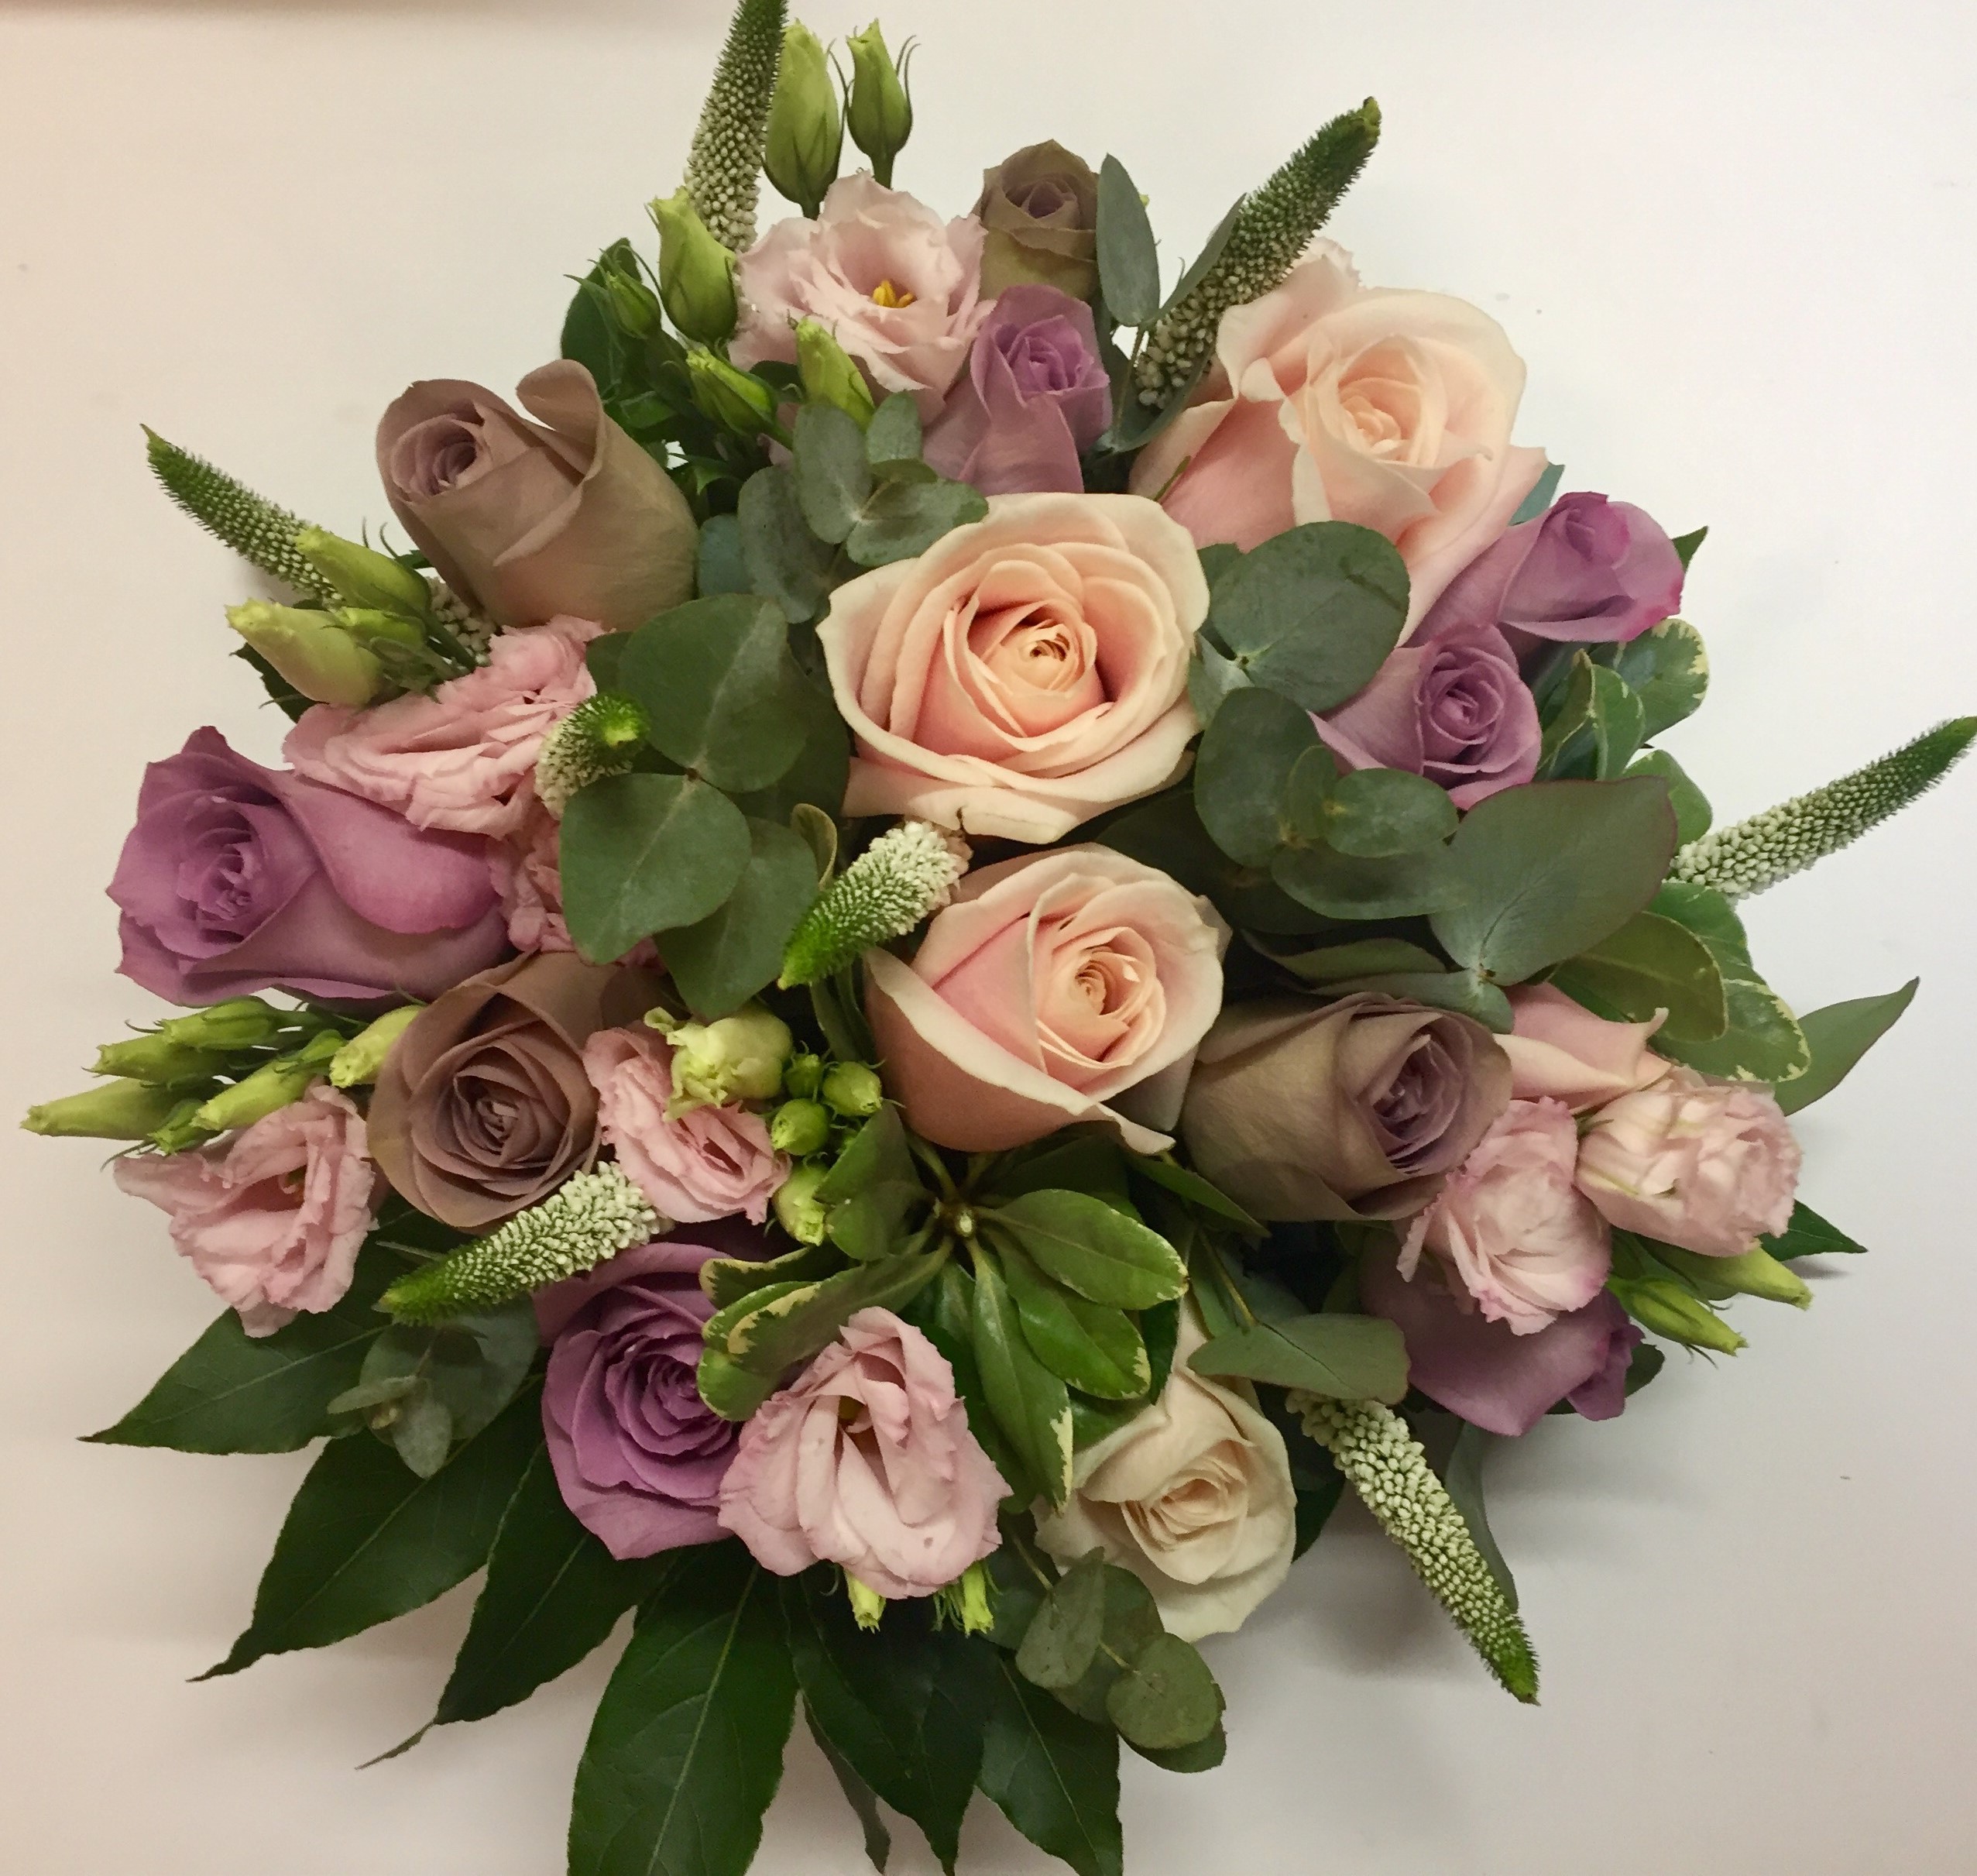 rustic wild theme wedding bouquet of roses lisianthus and freesia veronnica and wax flower and foliages